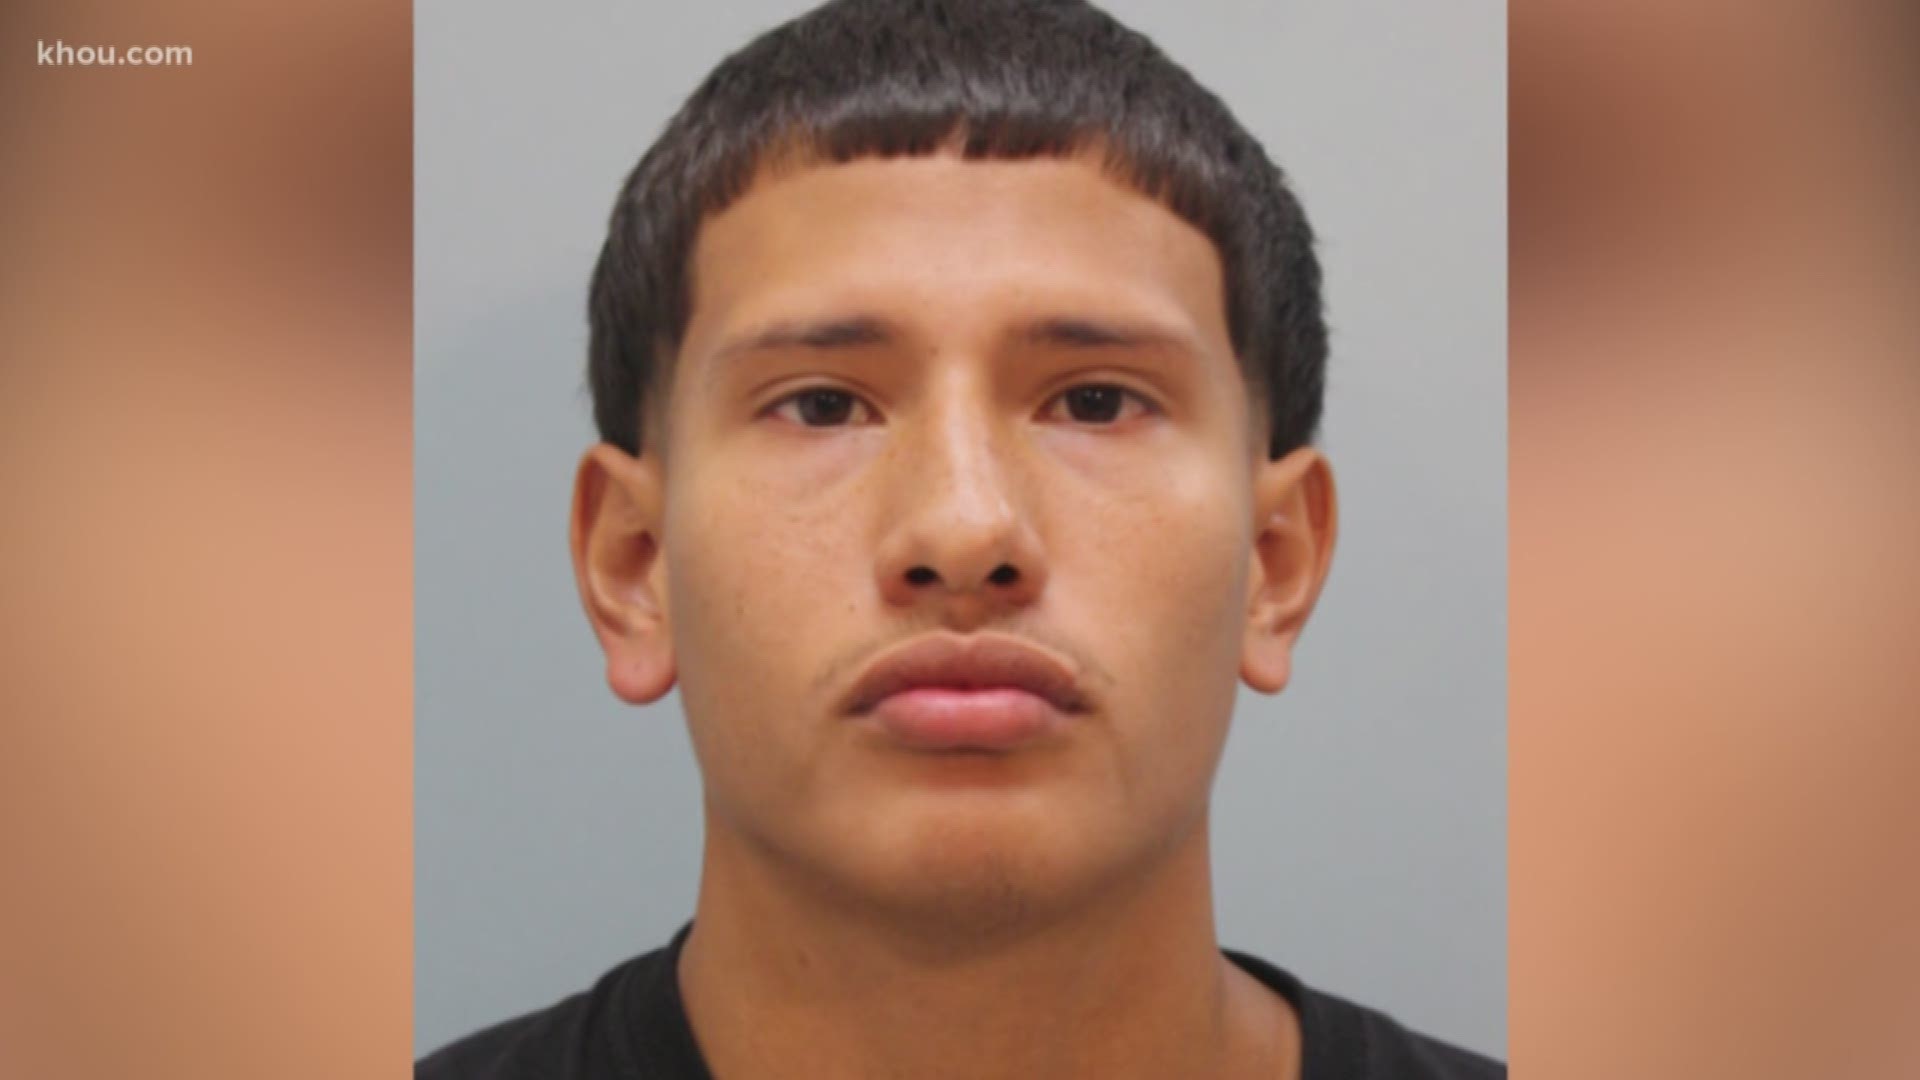 Harris County Sheriff’s deputies have arrested a suspect in the fatal shooting of an 11-year-old Channelview boy.